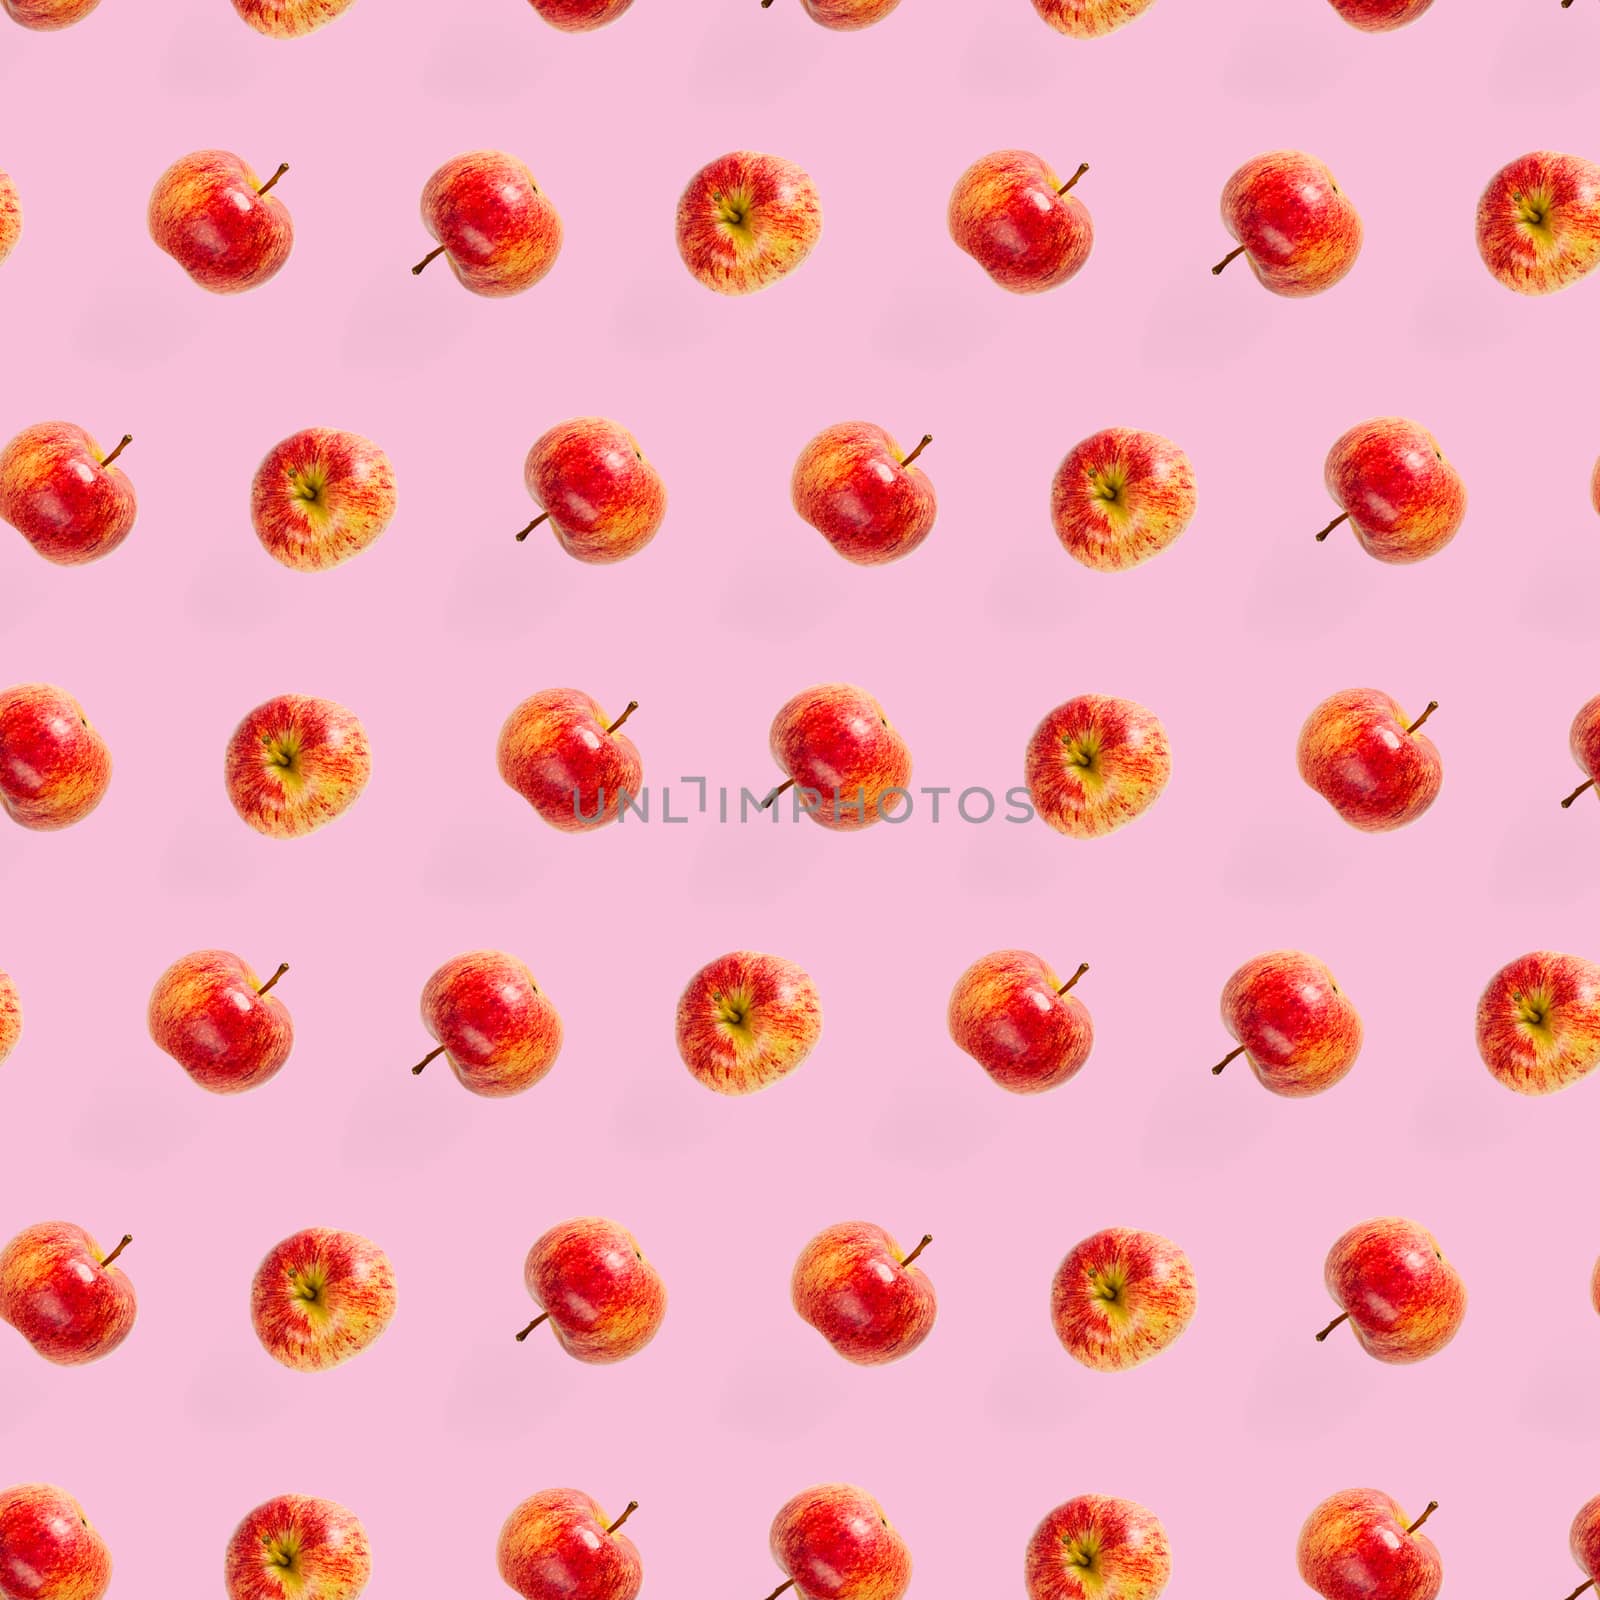 Seamless pattern with ripe apples. Apple seamless pattern on pink background. Tropical fruit abstract background.